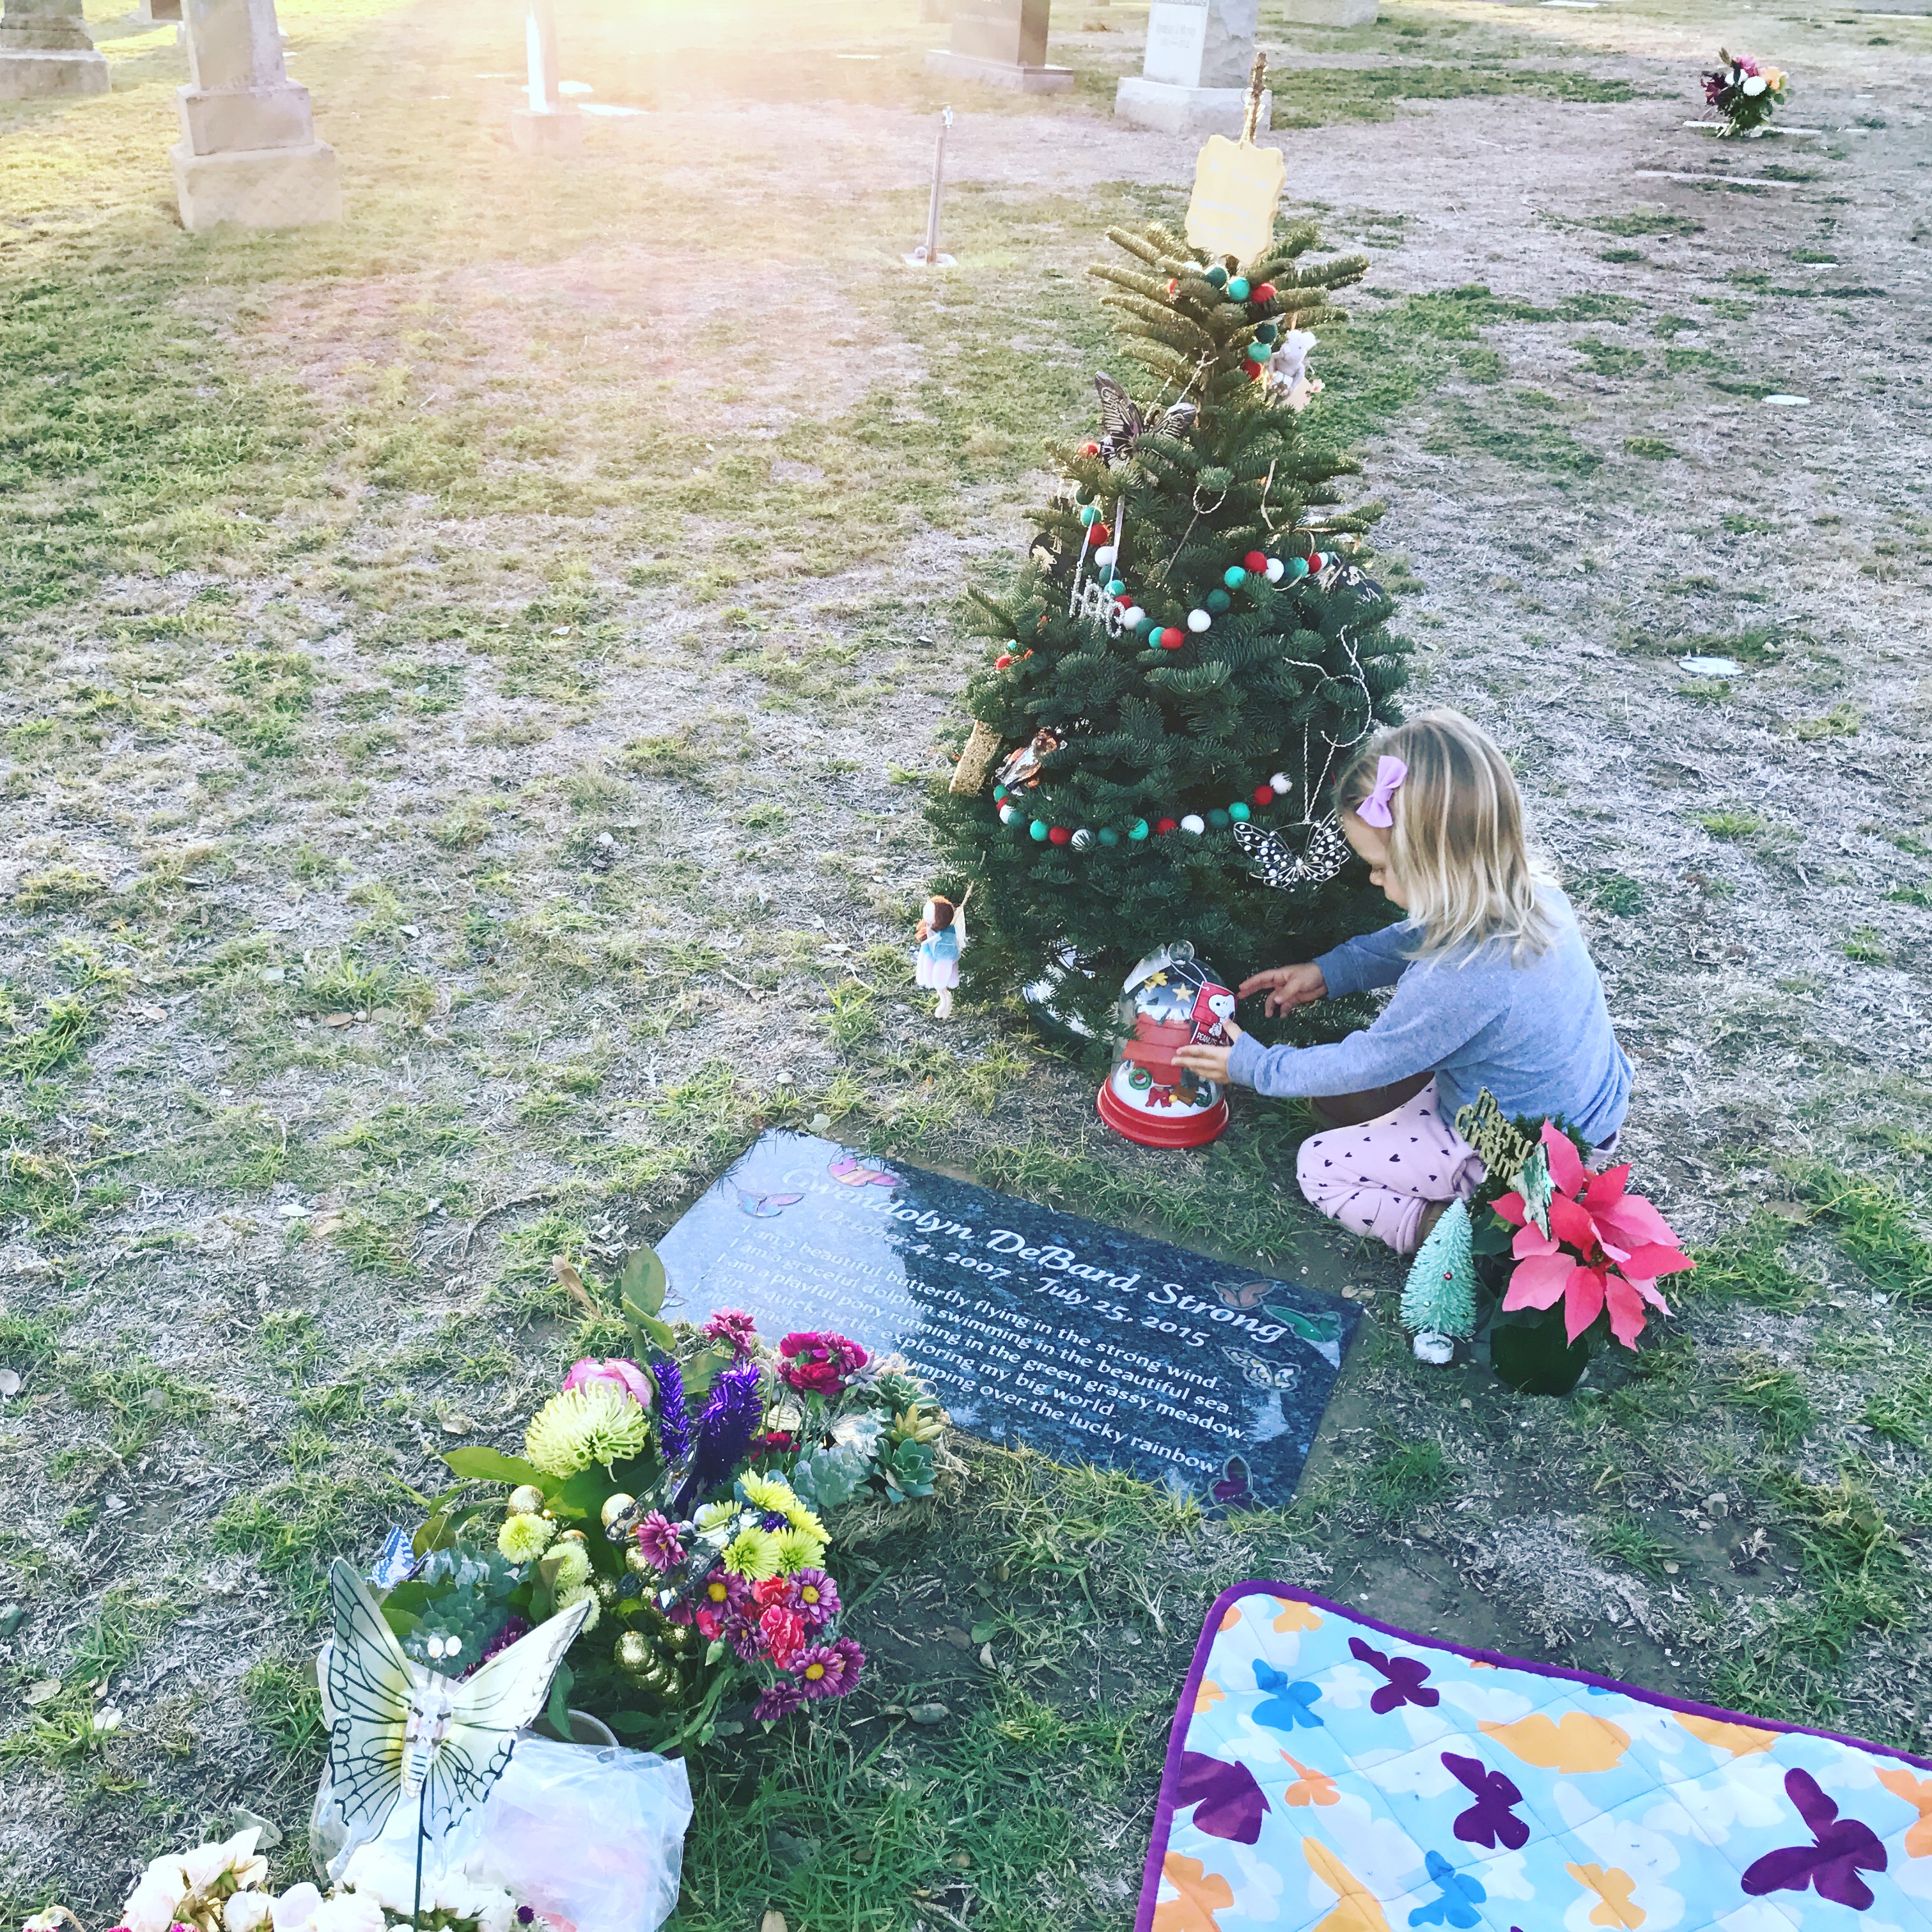 The author's daughter decorating her sister's Christmas tree at the cemetery